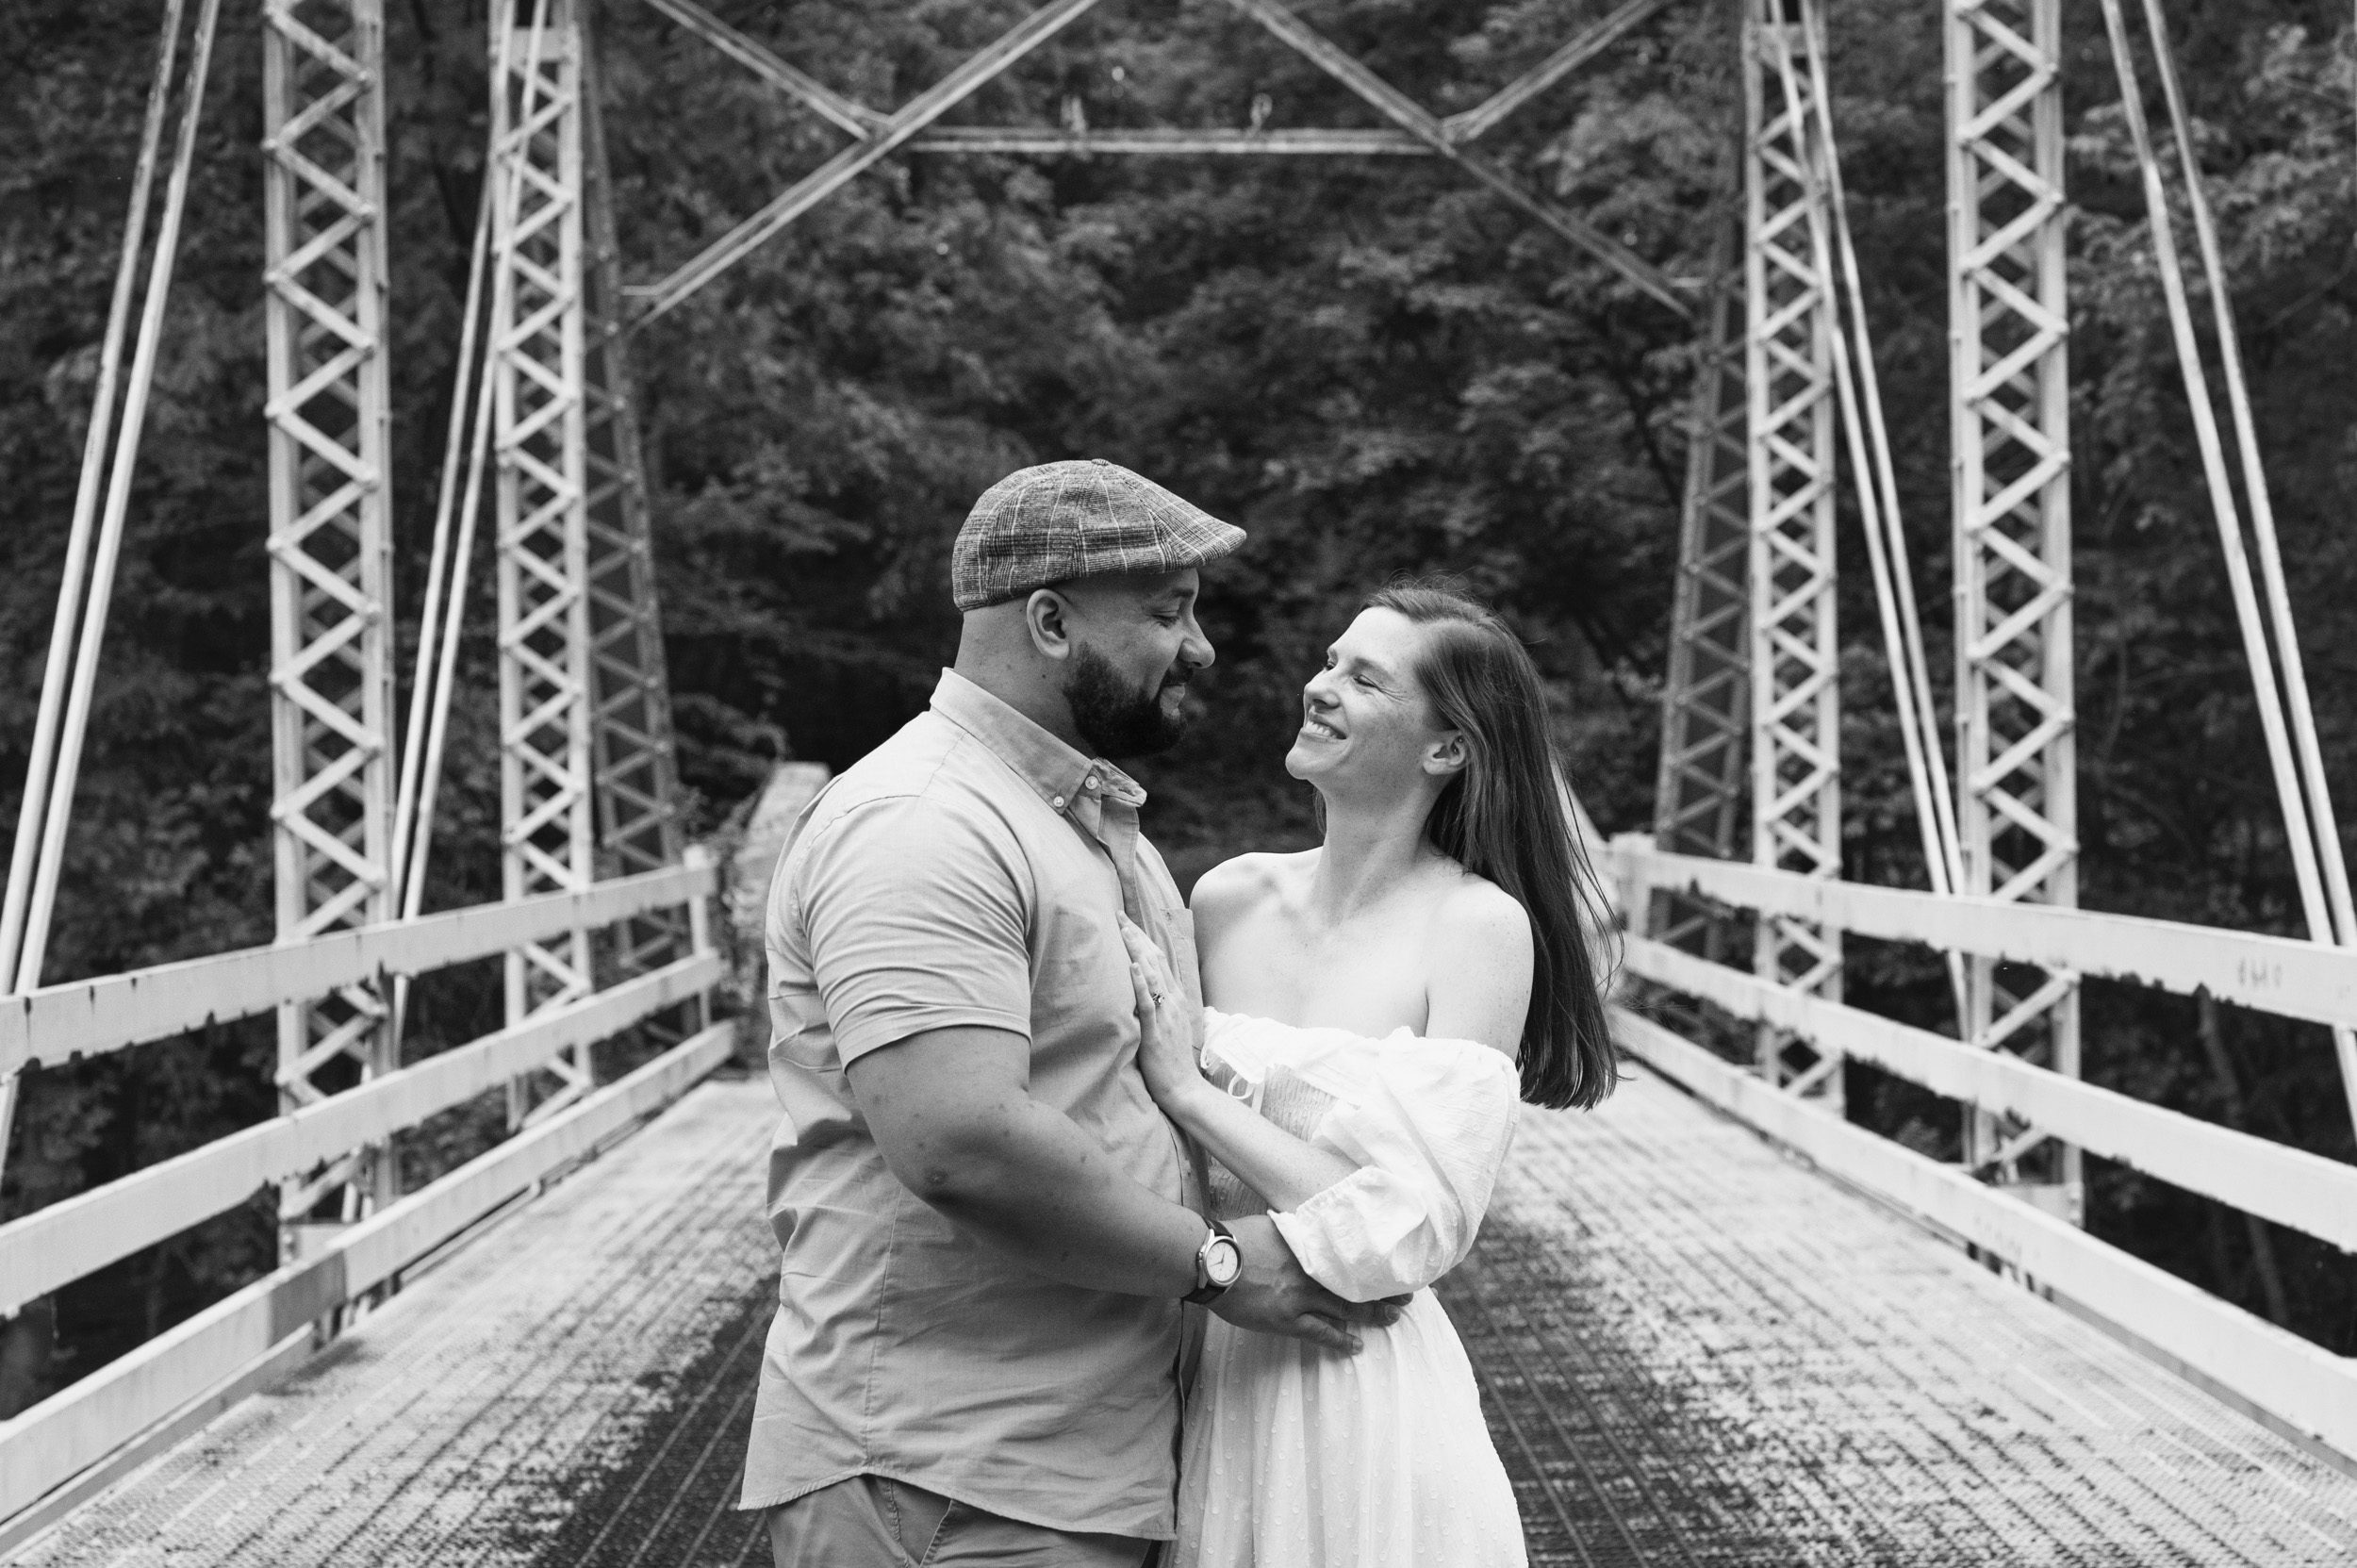 a black and white close up of a couple embracing and smiling at each other on a bridge during a family photoshoot